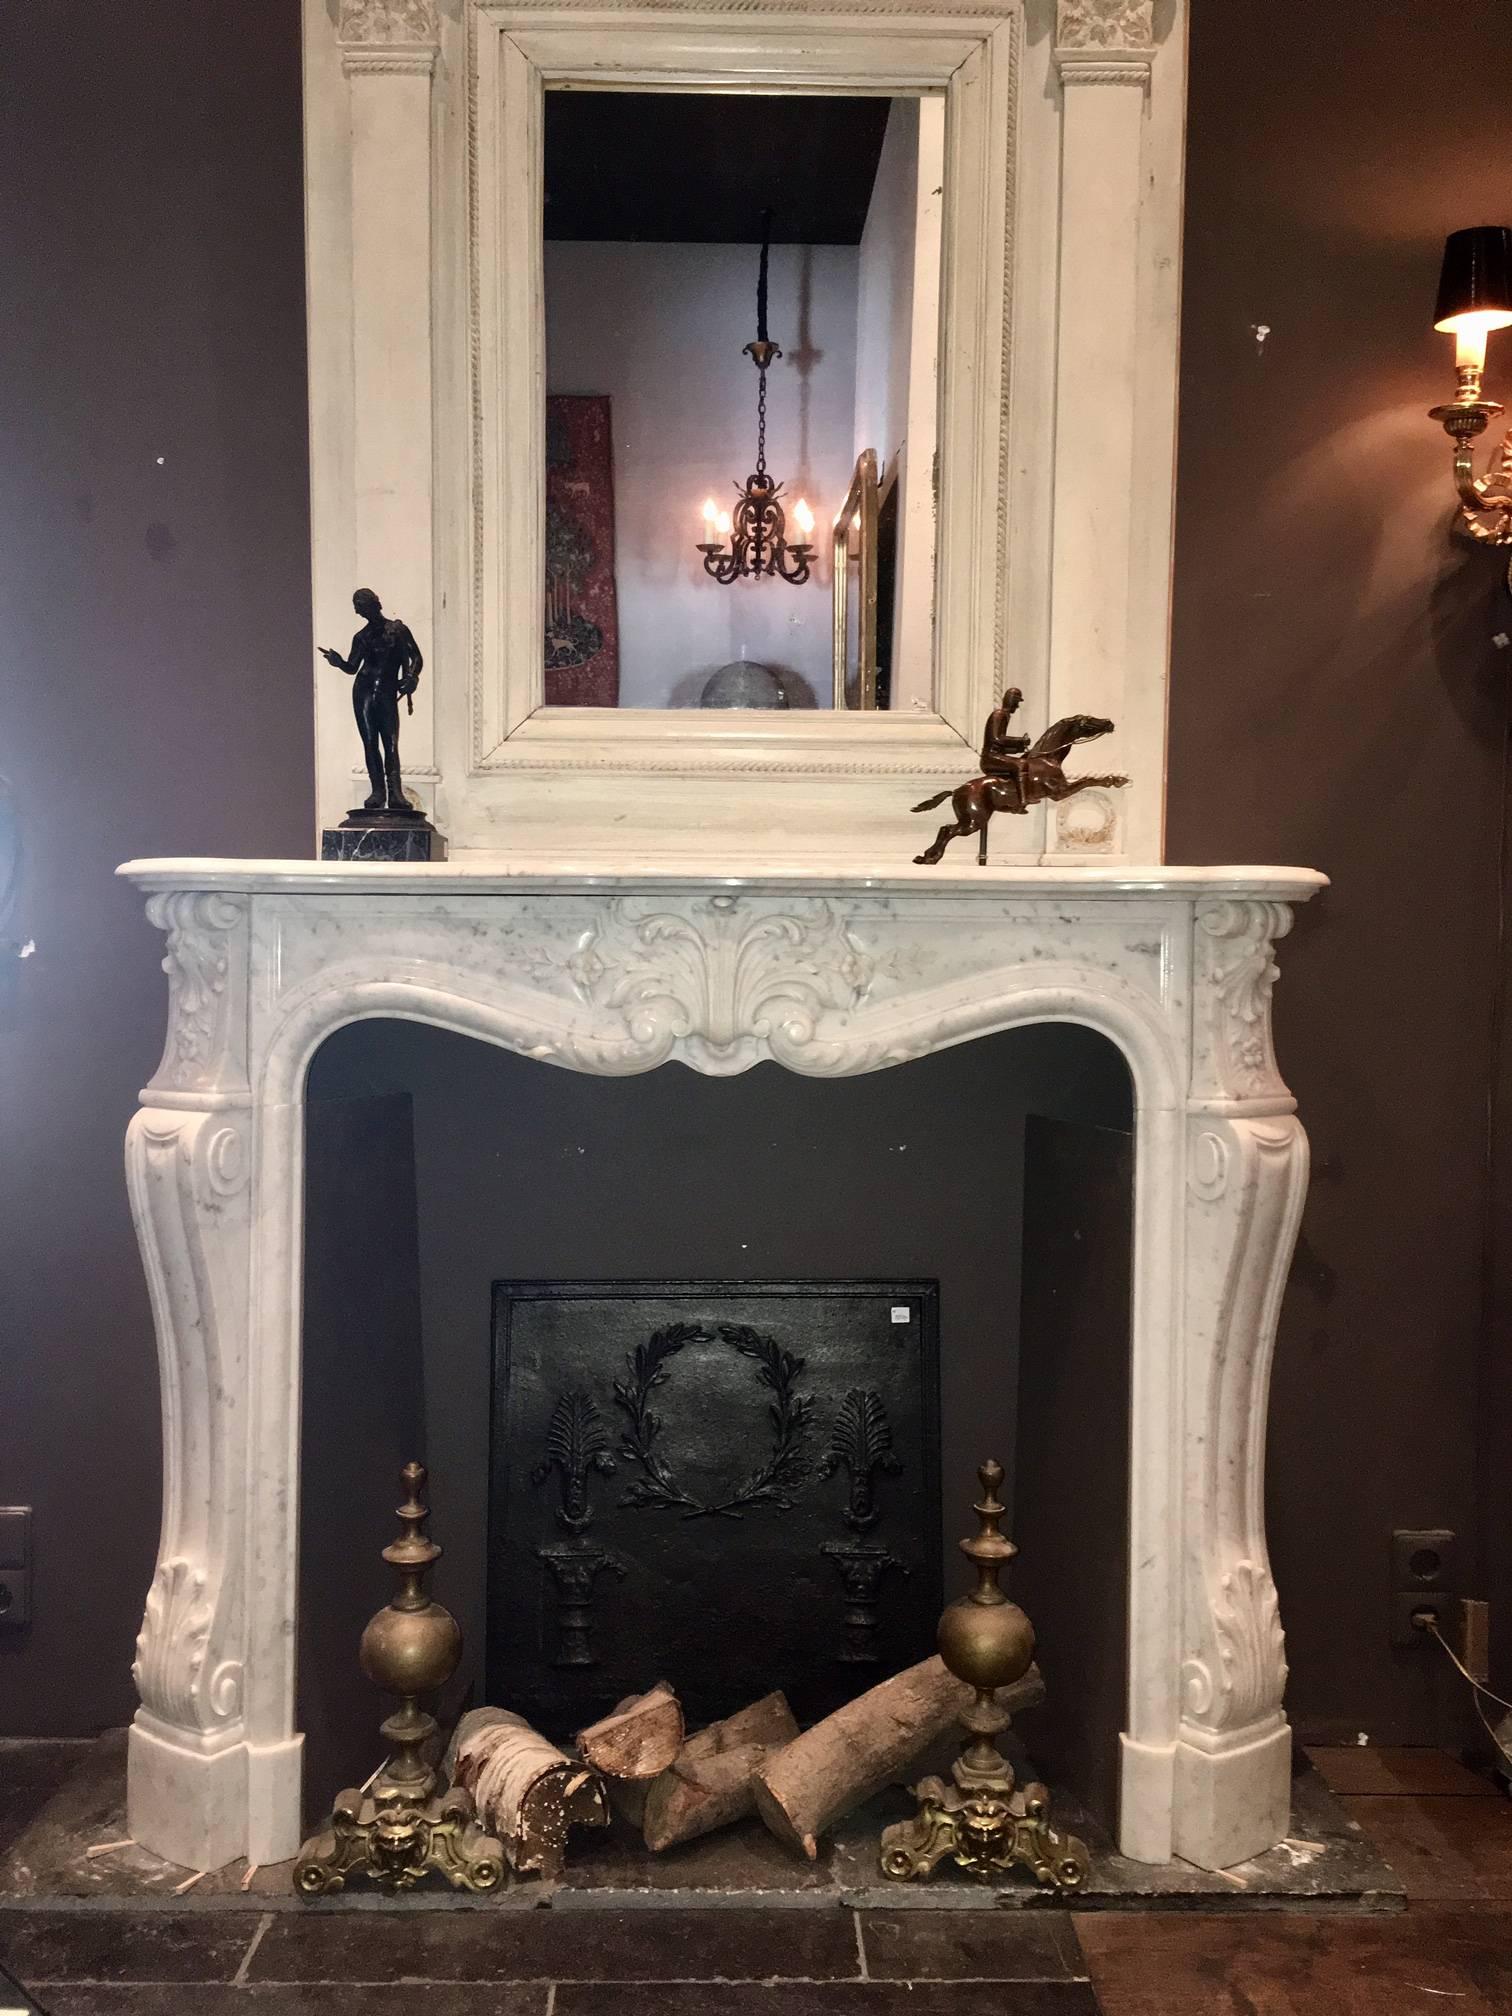 Beautifully carved French fireplace in the style of Louis XV. This type of fireplace was very much in fashion in Paris in the mid-19th century. The fireplace is richly decorated with floral shapes. The fireplace is made from fine Italian Carrara